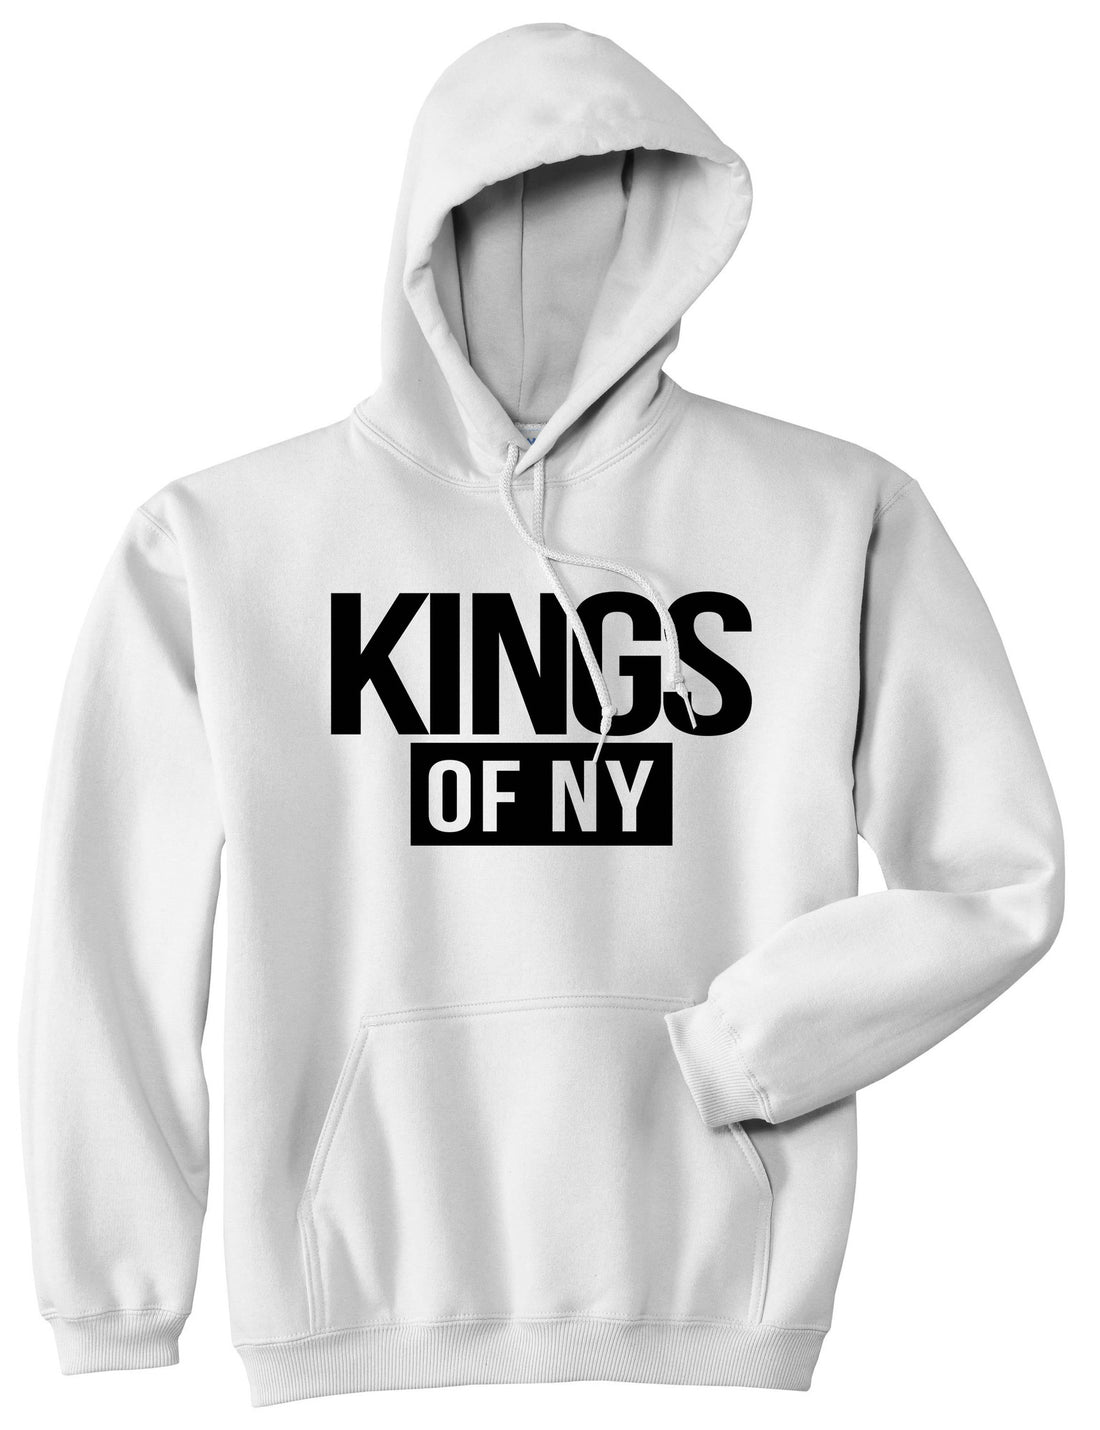 Kings Of NY Logo W15 Pullover Hoodie in White By Kings Of NY